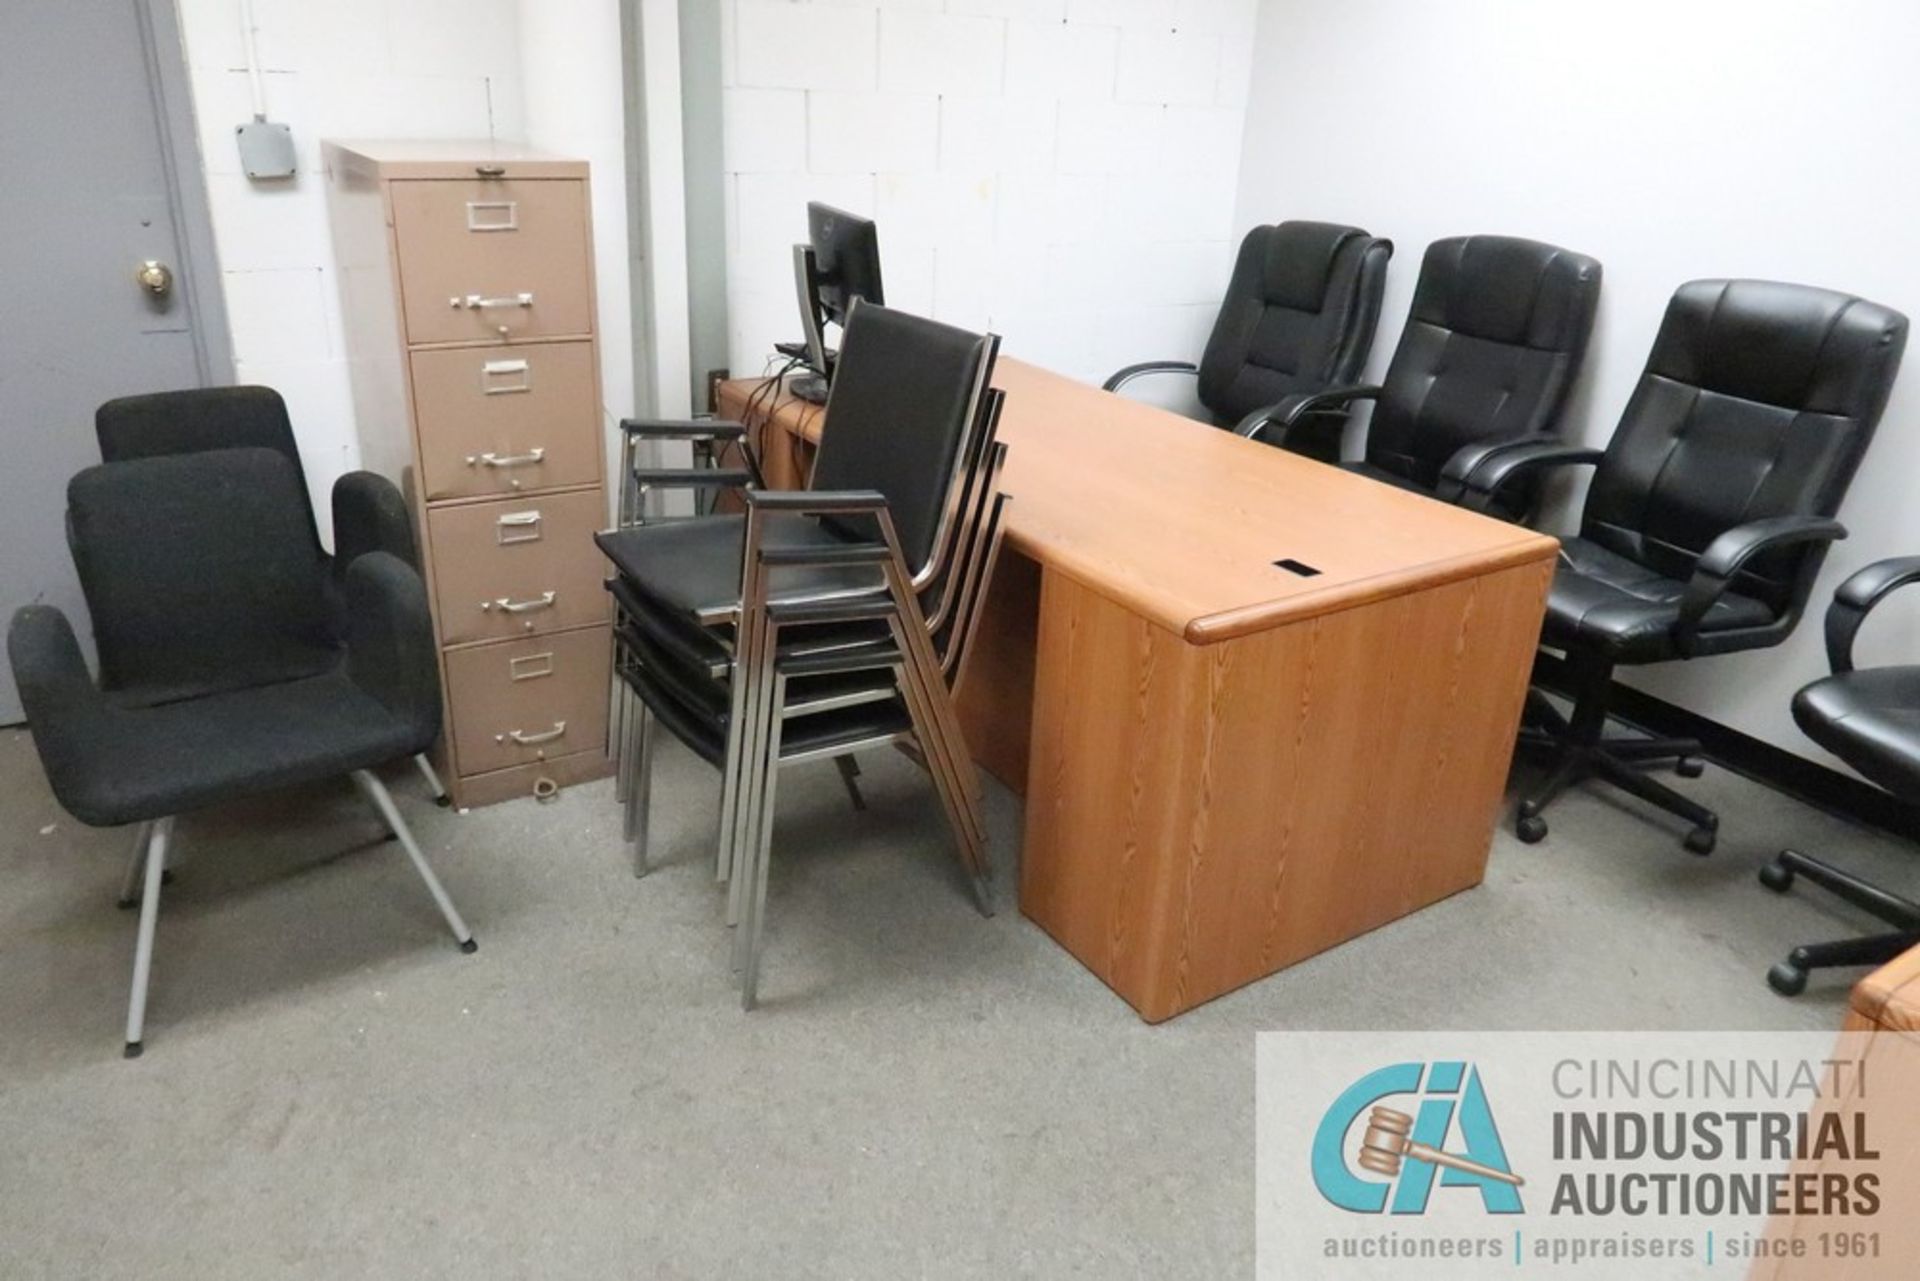 (LOT) CONTENTS OF OFFICE, FURNITURE ONLY - (12) CHAIRS, (2) DESKS, LETTER FILE, NO ELECTRONICS OR - Image 2 of 3